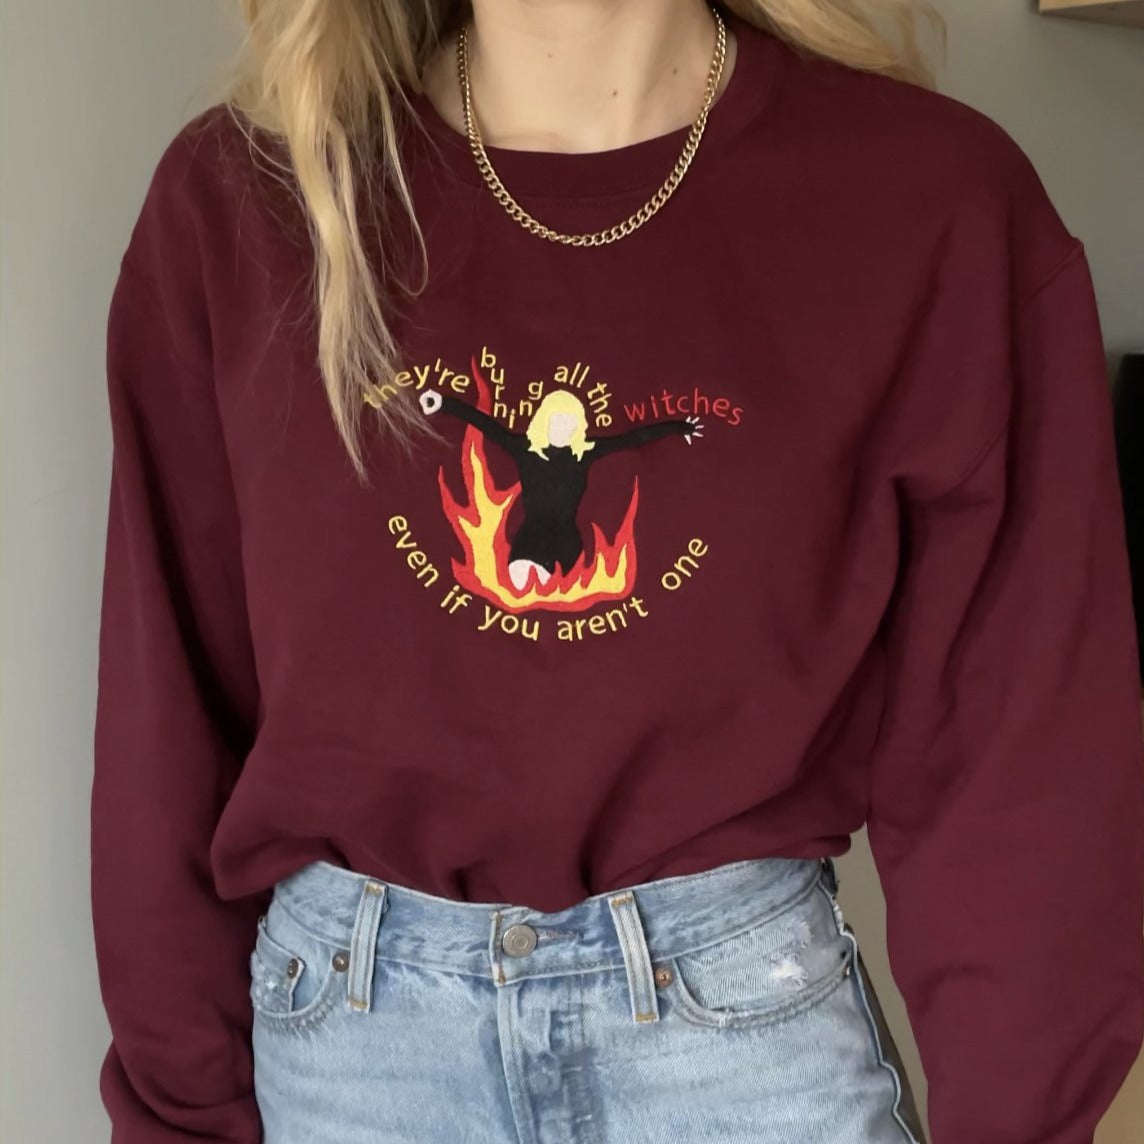 Taylor Swift “they’re burning all the witches even if you aren’t one” Crewneck